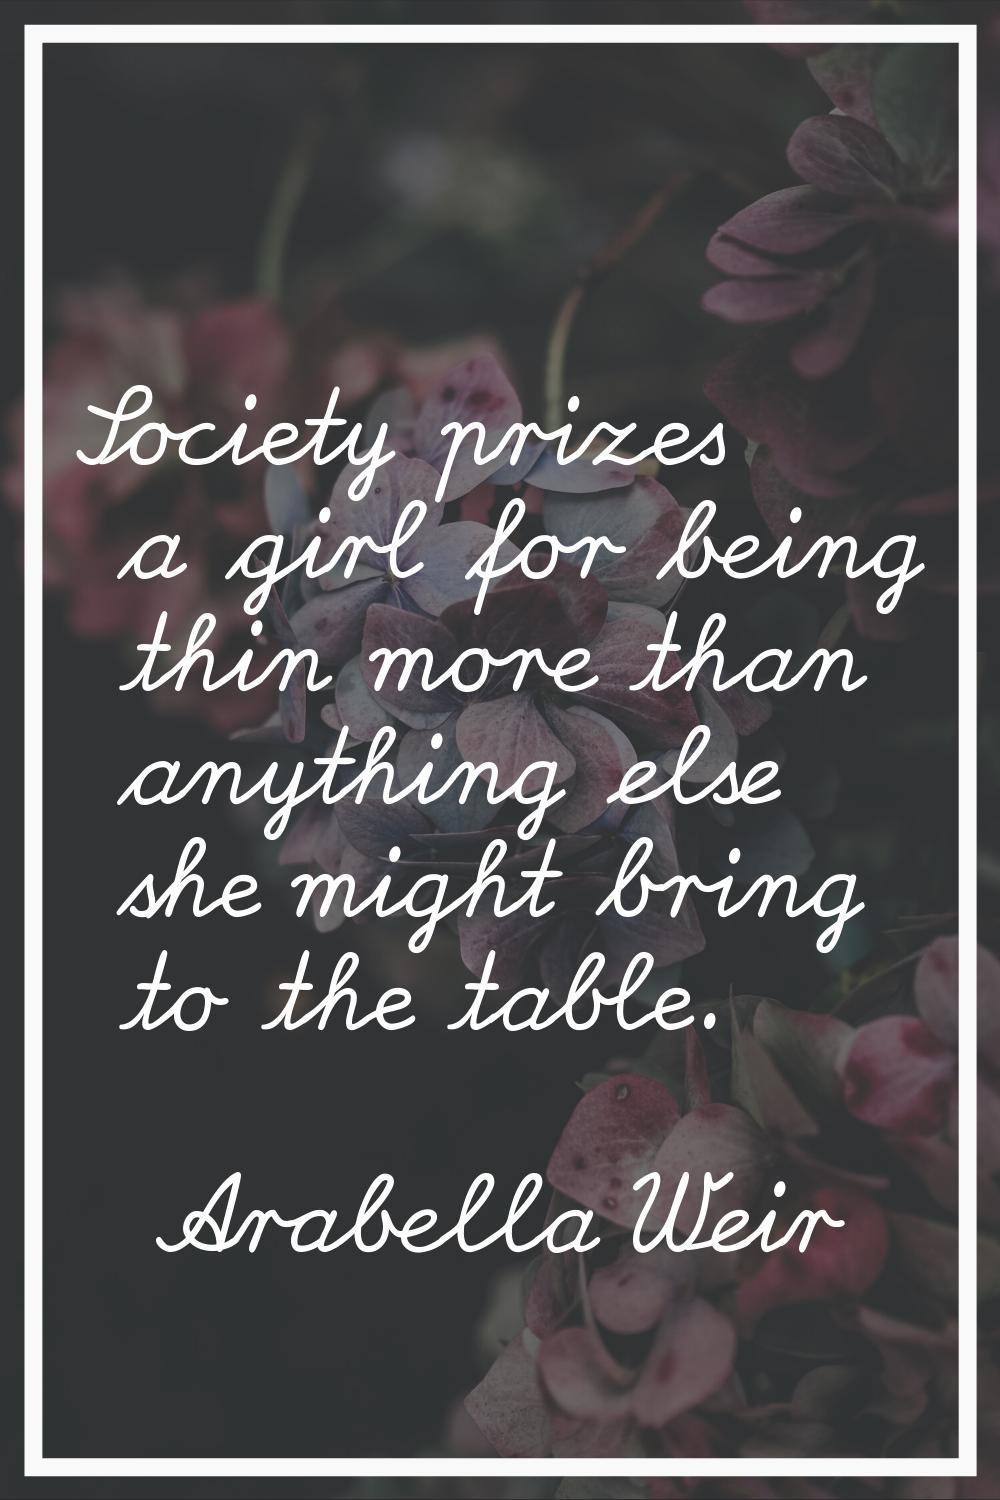 Society prizes a girl for being thin more than anything else she might bring to the table.